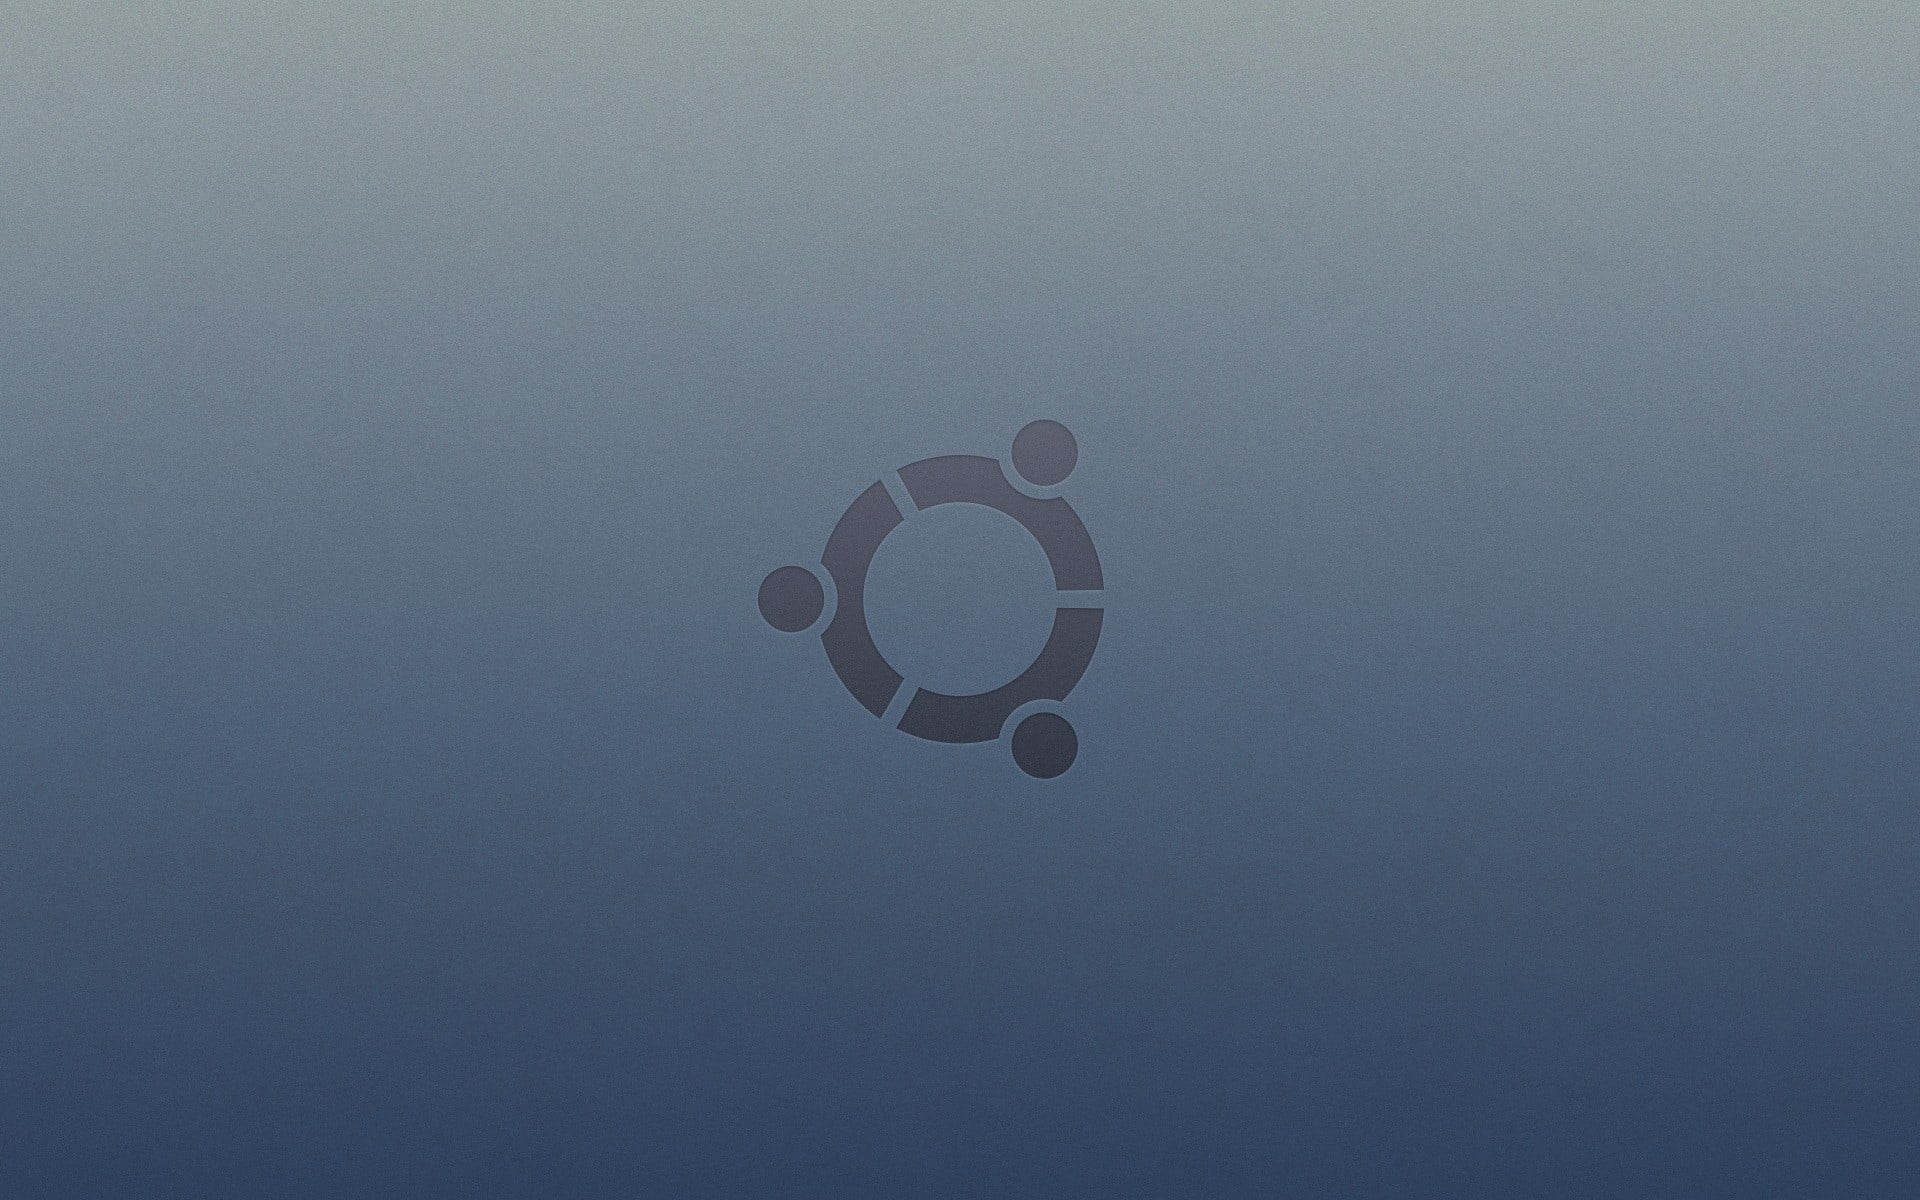 gray and black logo, technology, Linux, simple background, sky